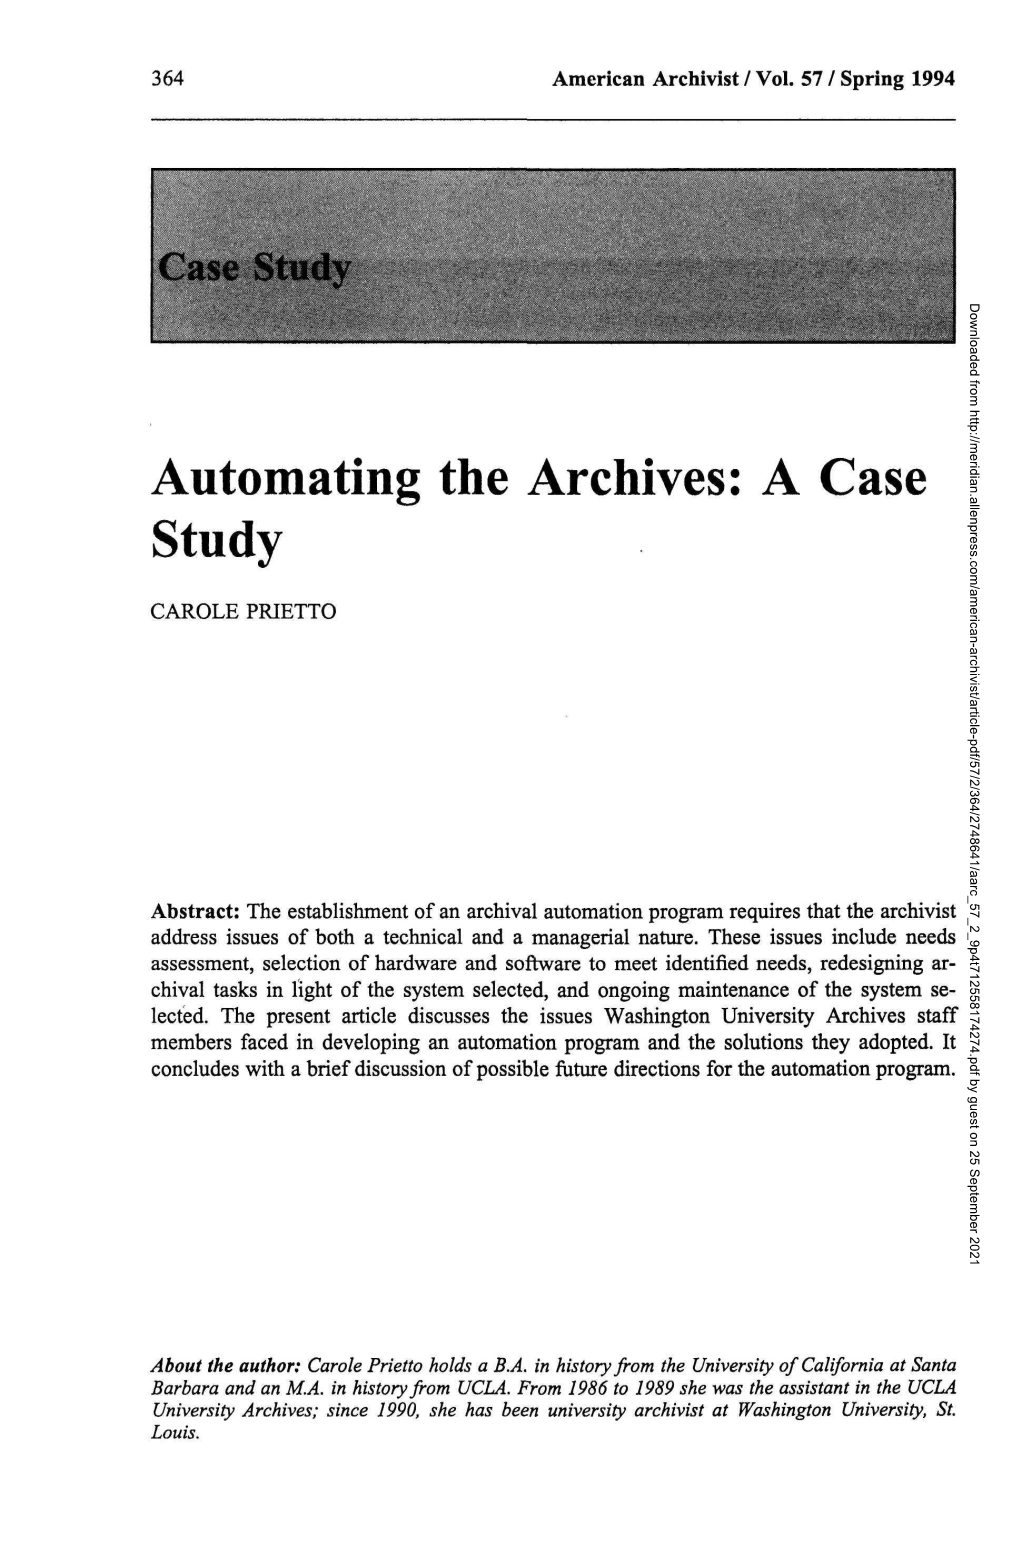 Automating the Archives: a Case Study